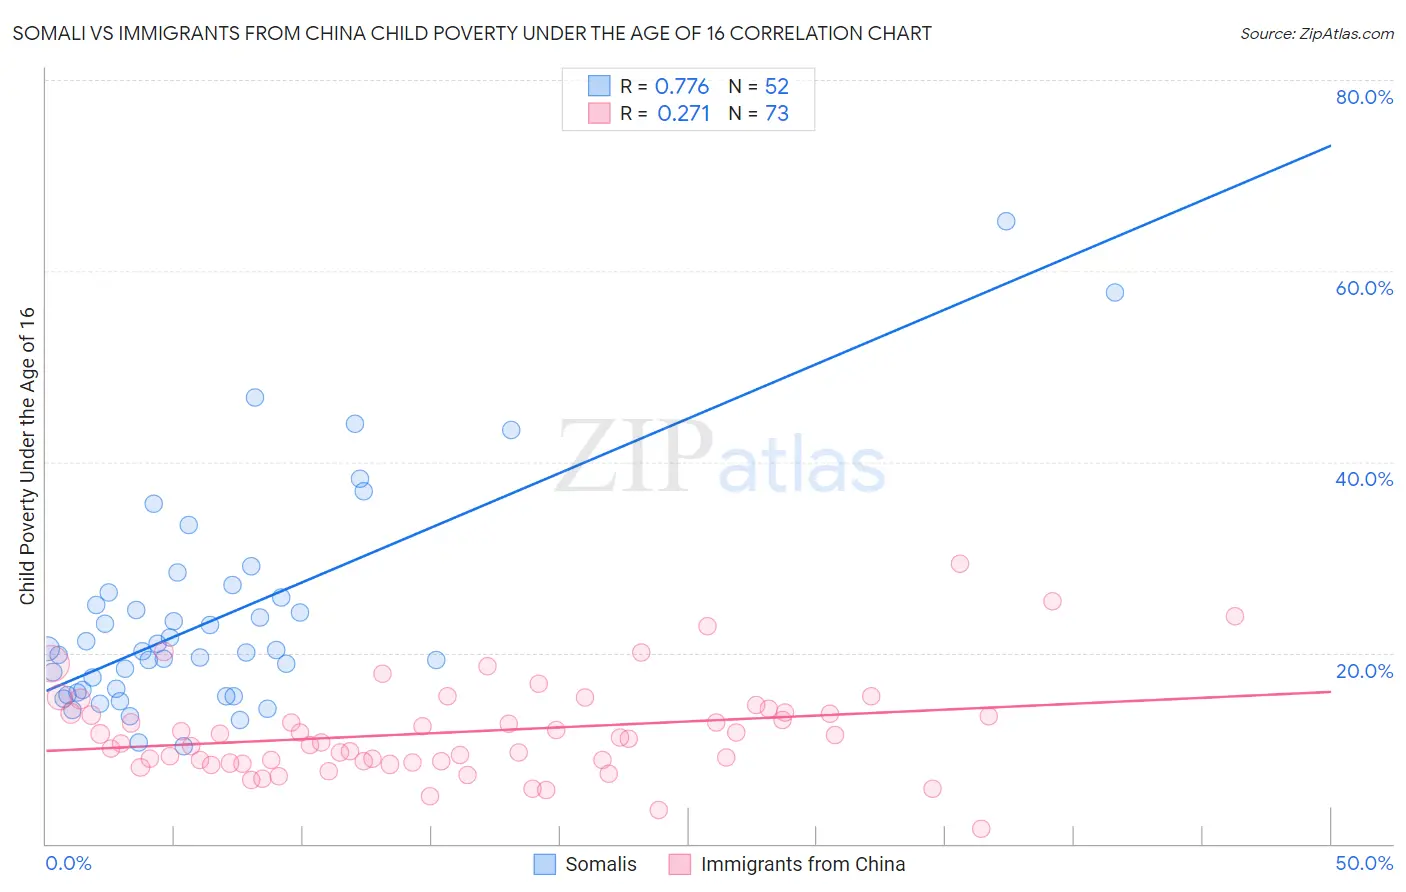 Somali vs Immigrants from China Child Poverty Under the Age of 16